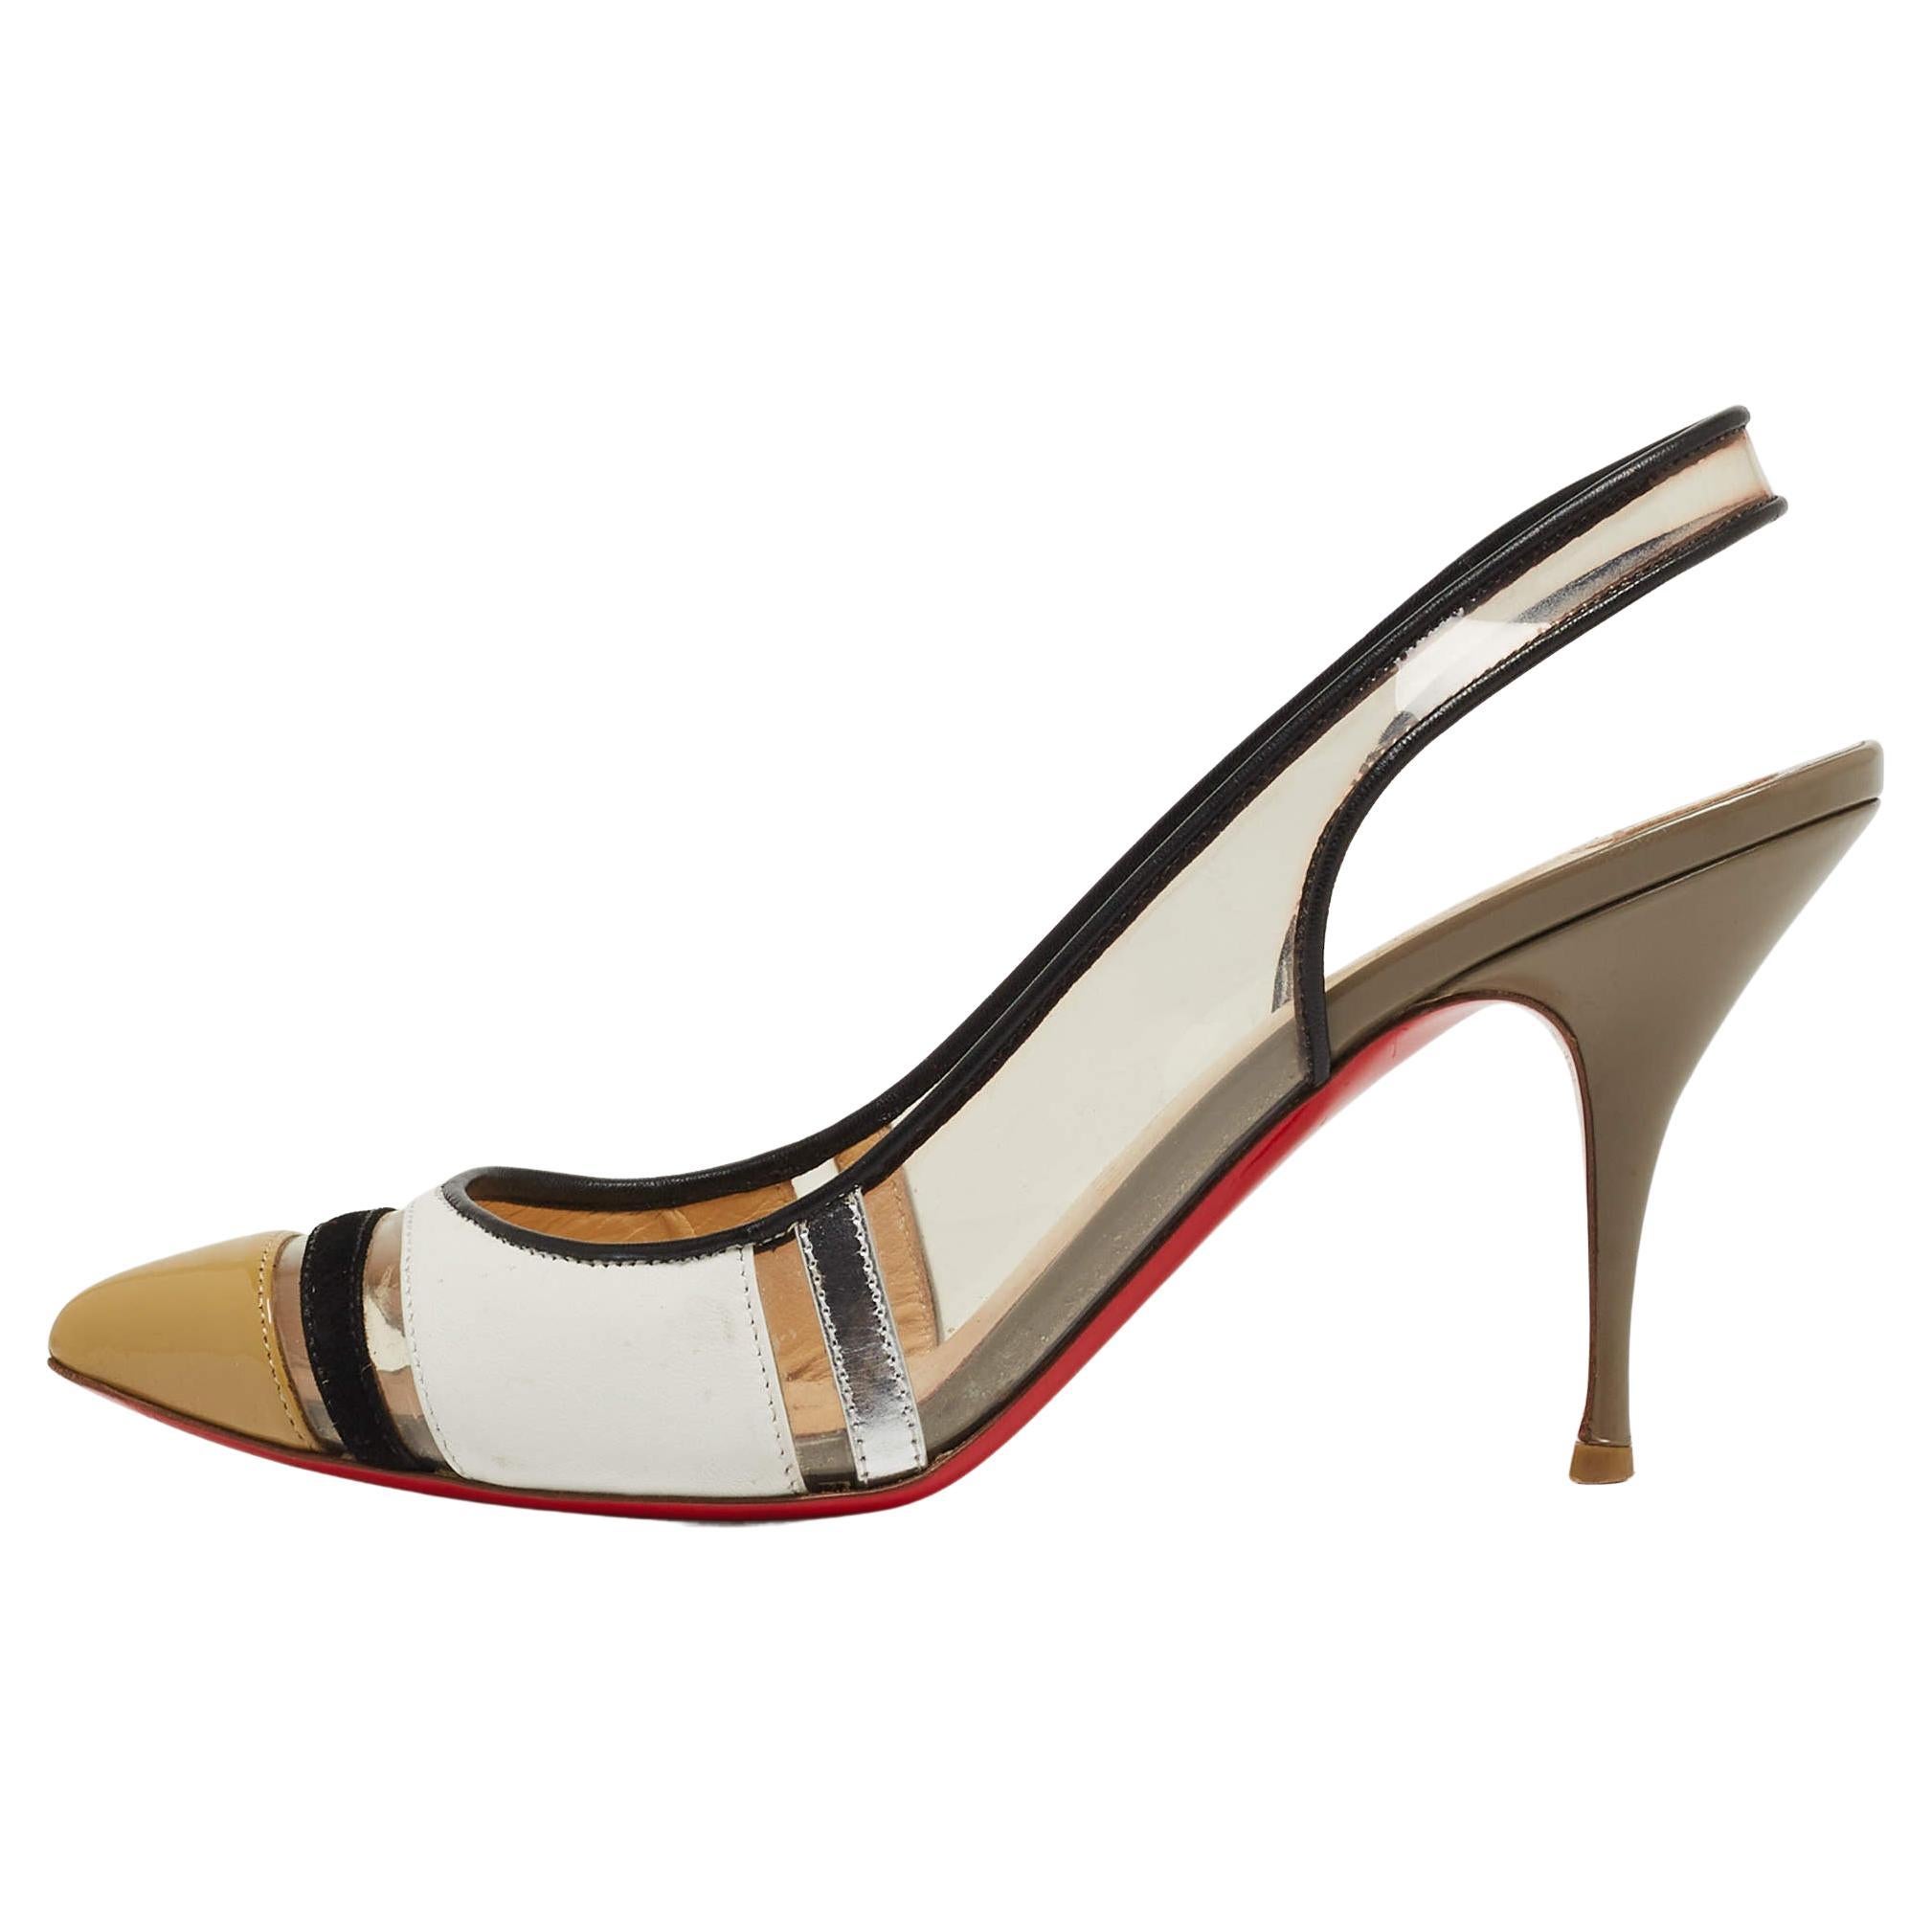 Christian Louboutin Tri-Color PVC and Leather Highway Slingback Sandals Size 36. For Sale